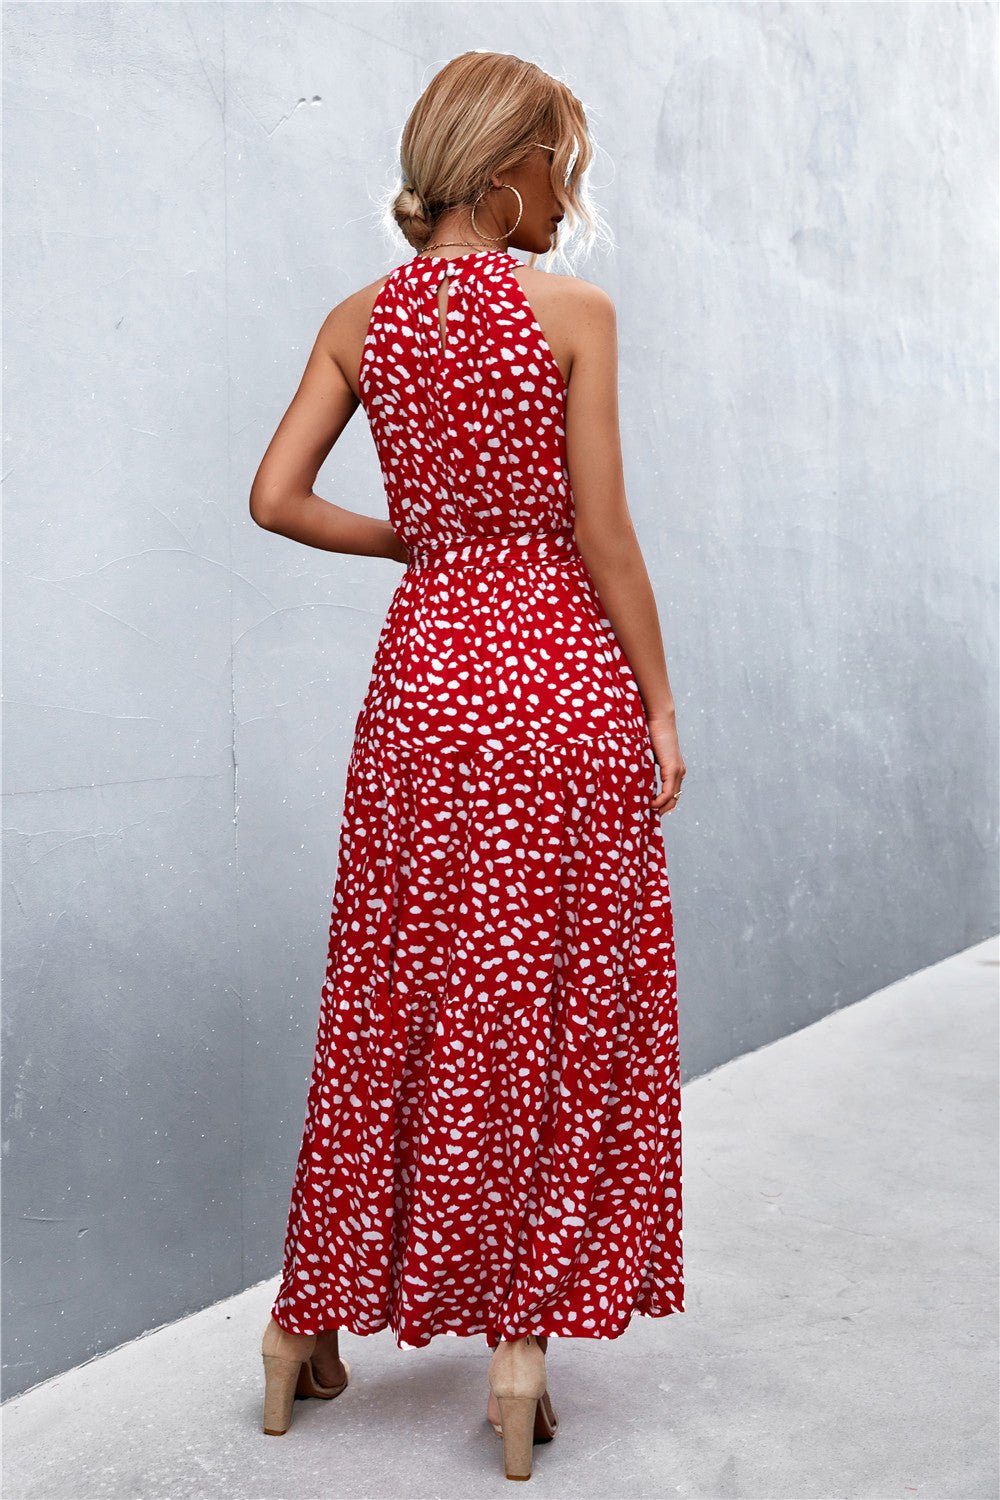 Let Me Remind You Printed Maxi Dress - red polka dot maxi dress with halter neck and tie waist. #Firefly Lane Boutique1